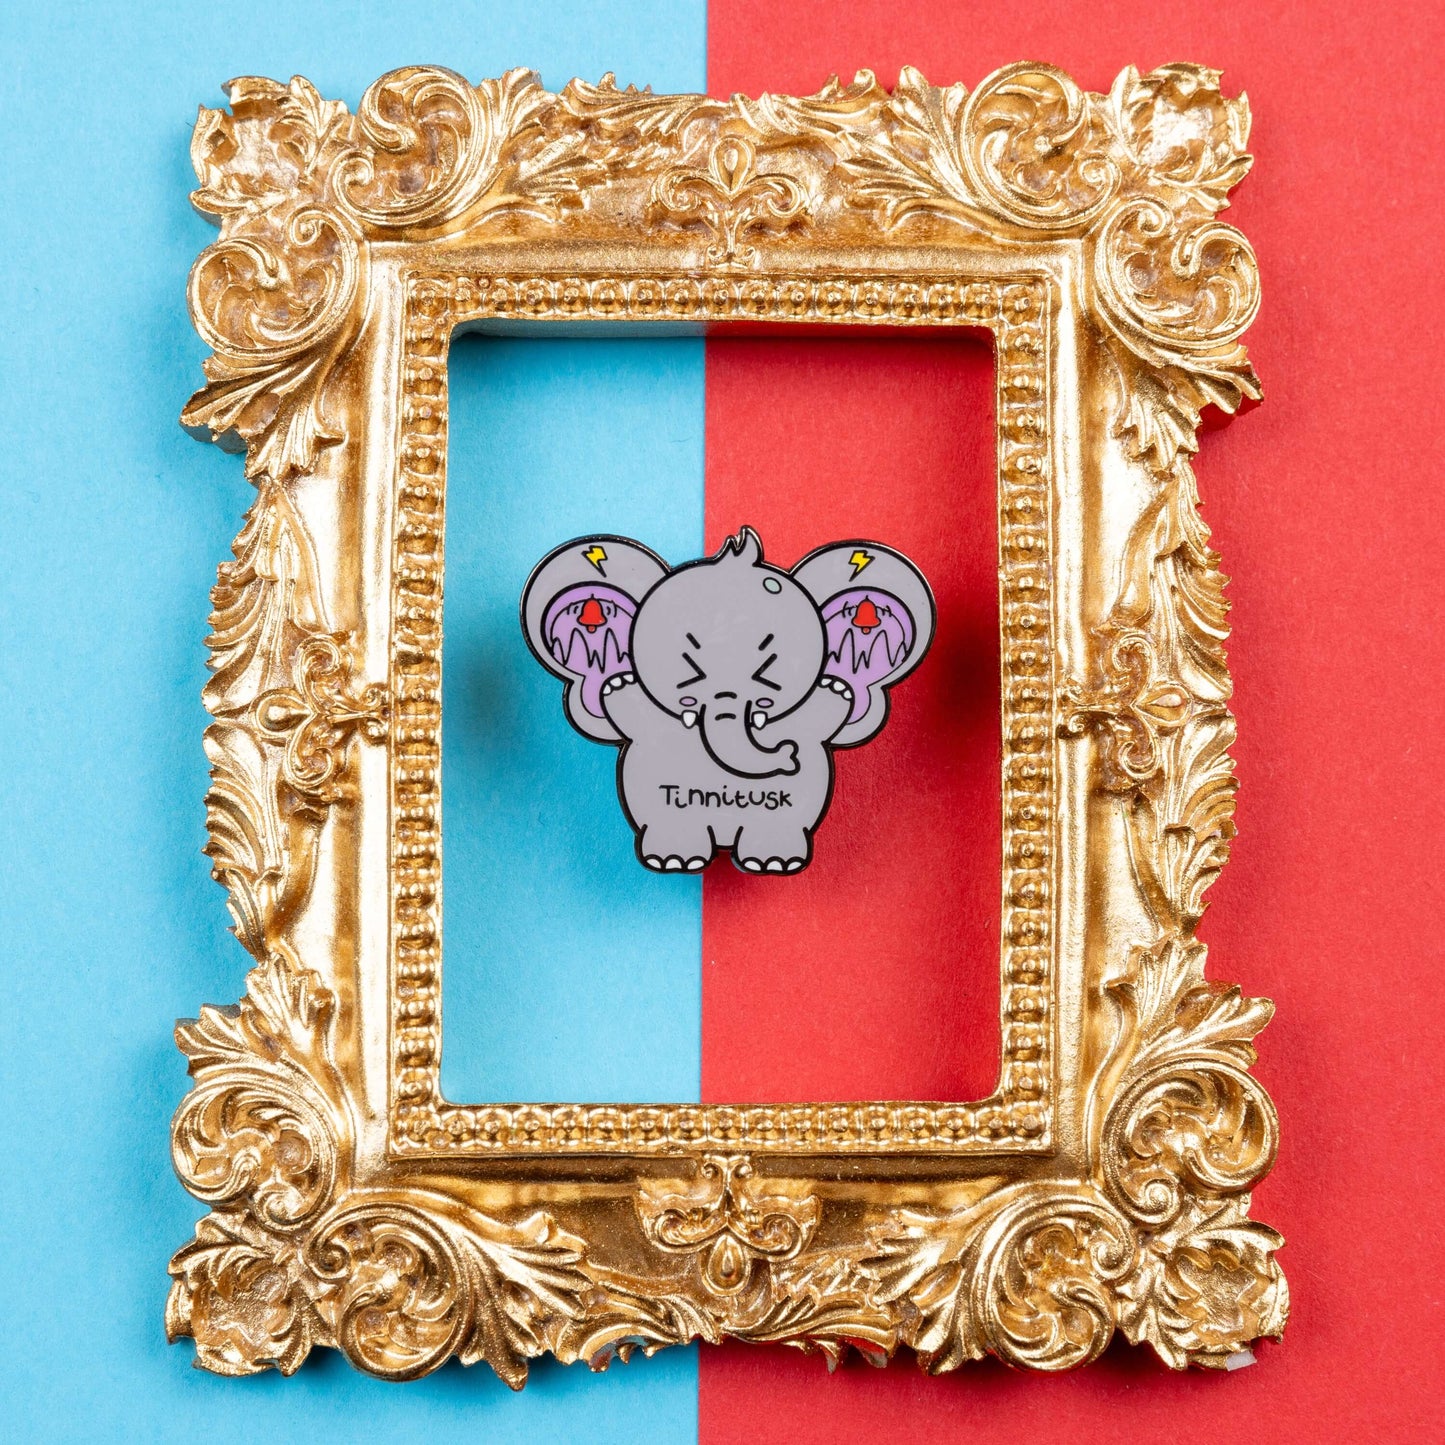 Tinnitus Enamel Pin on blue and red card inside a gold ornate frame. A grey elephant shaped enamel pin with big ears with purple on the inside of them and black squiggly lines with red ringing alarm bells above the lines and yellow lightening bolts above the bells. The elephant has its eyes screwed shut and its arms up. 'Tinnitusk' is written in black across its middle.